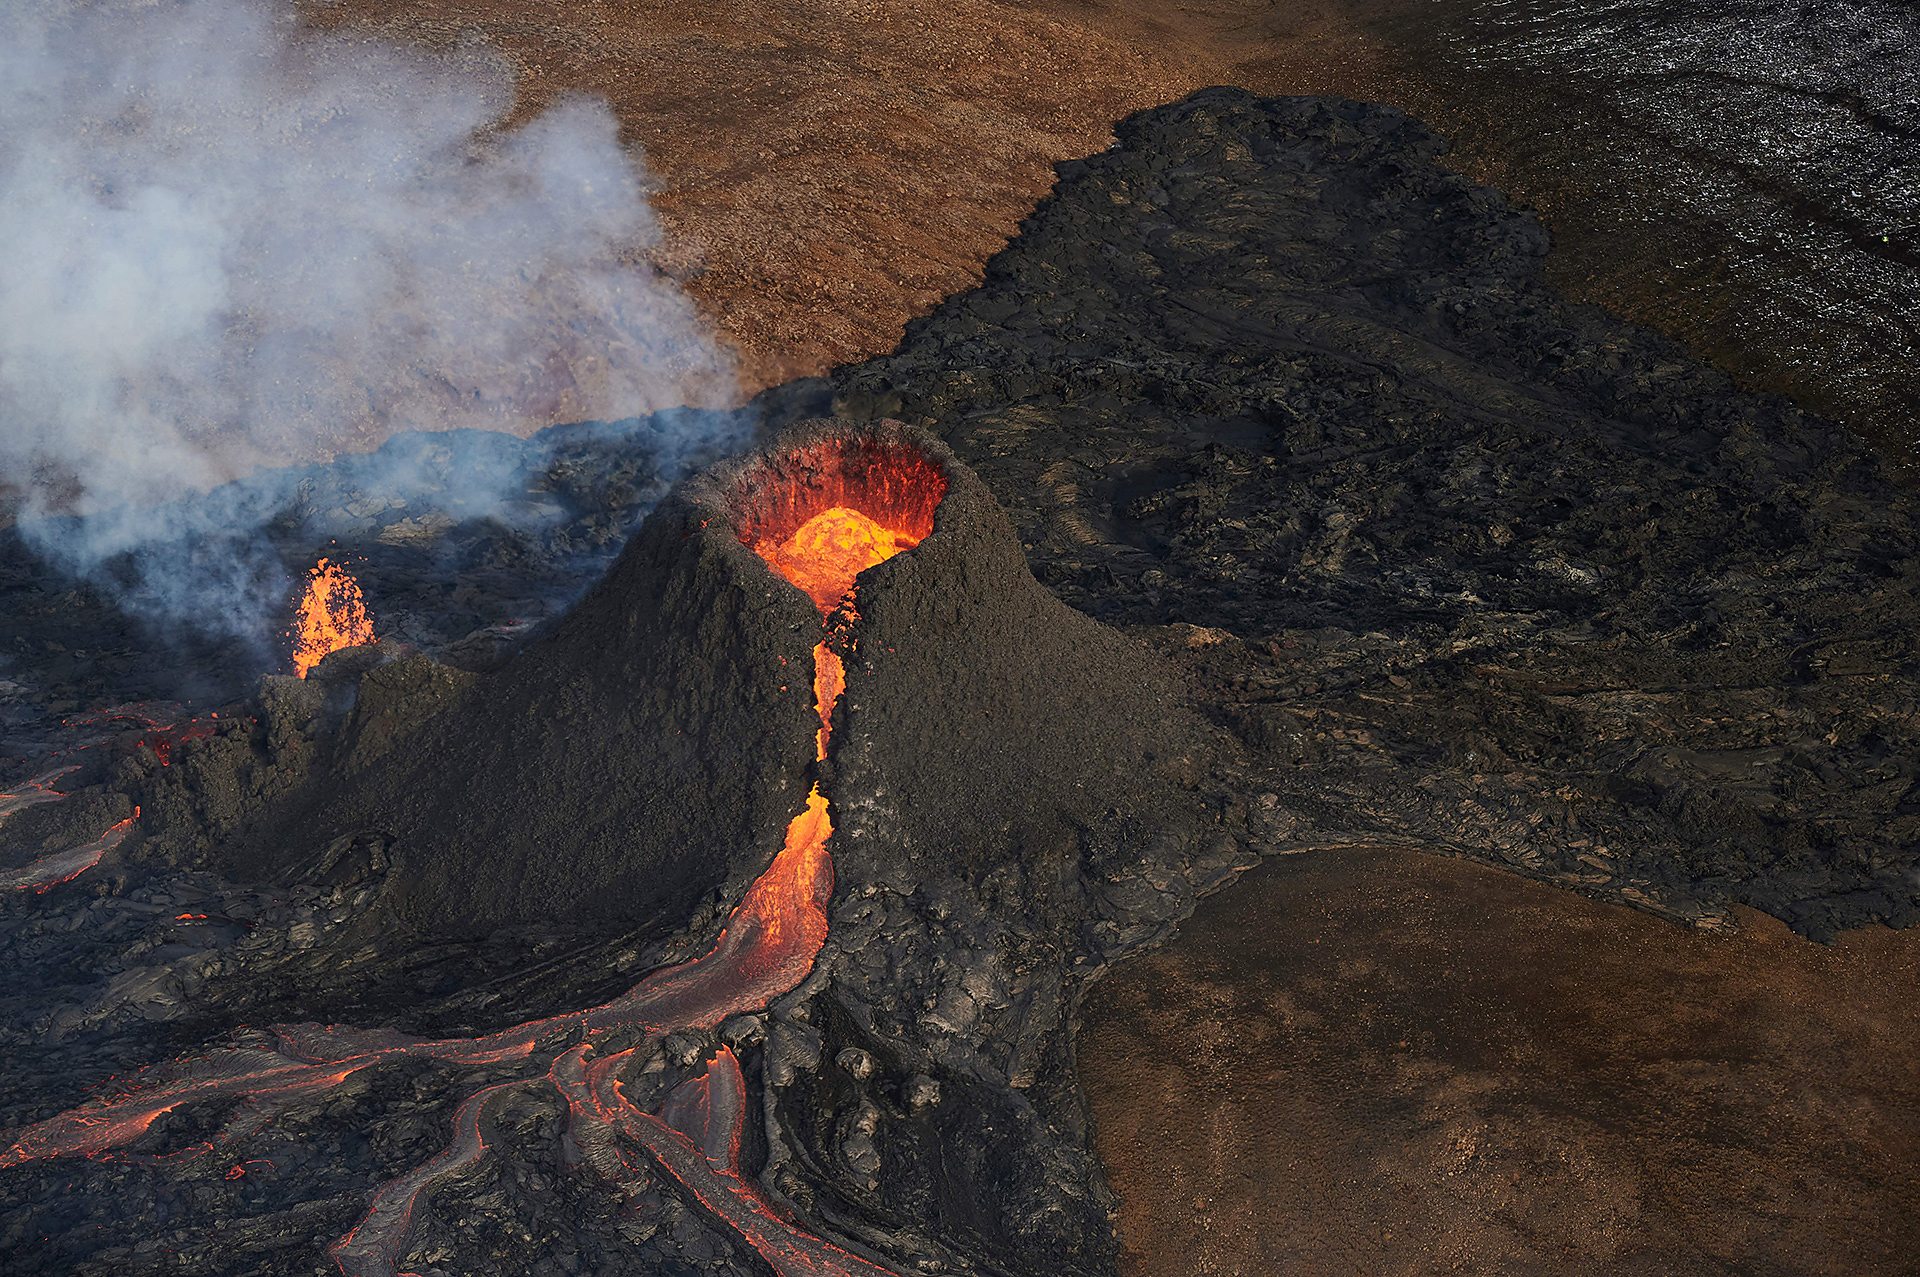 A dramatic flight over a red-hot volcano in Iceland